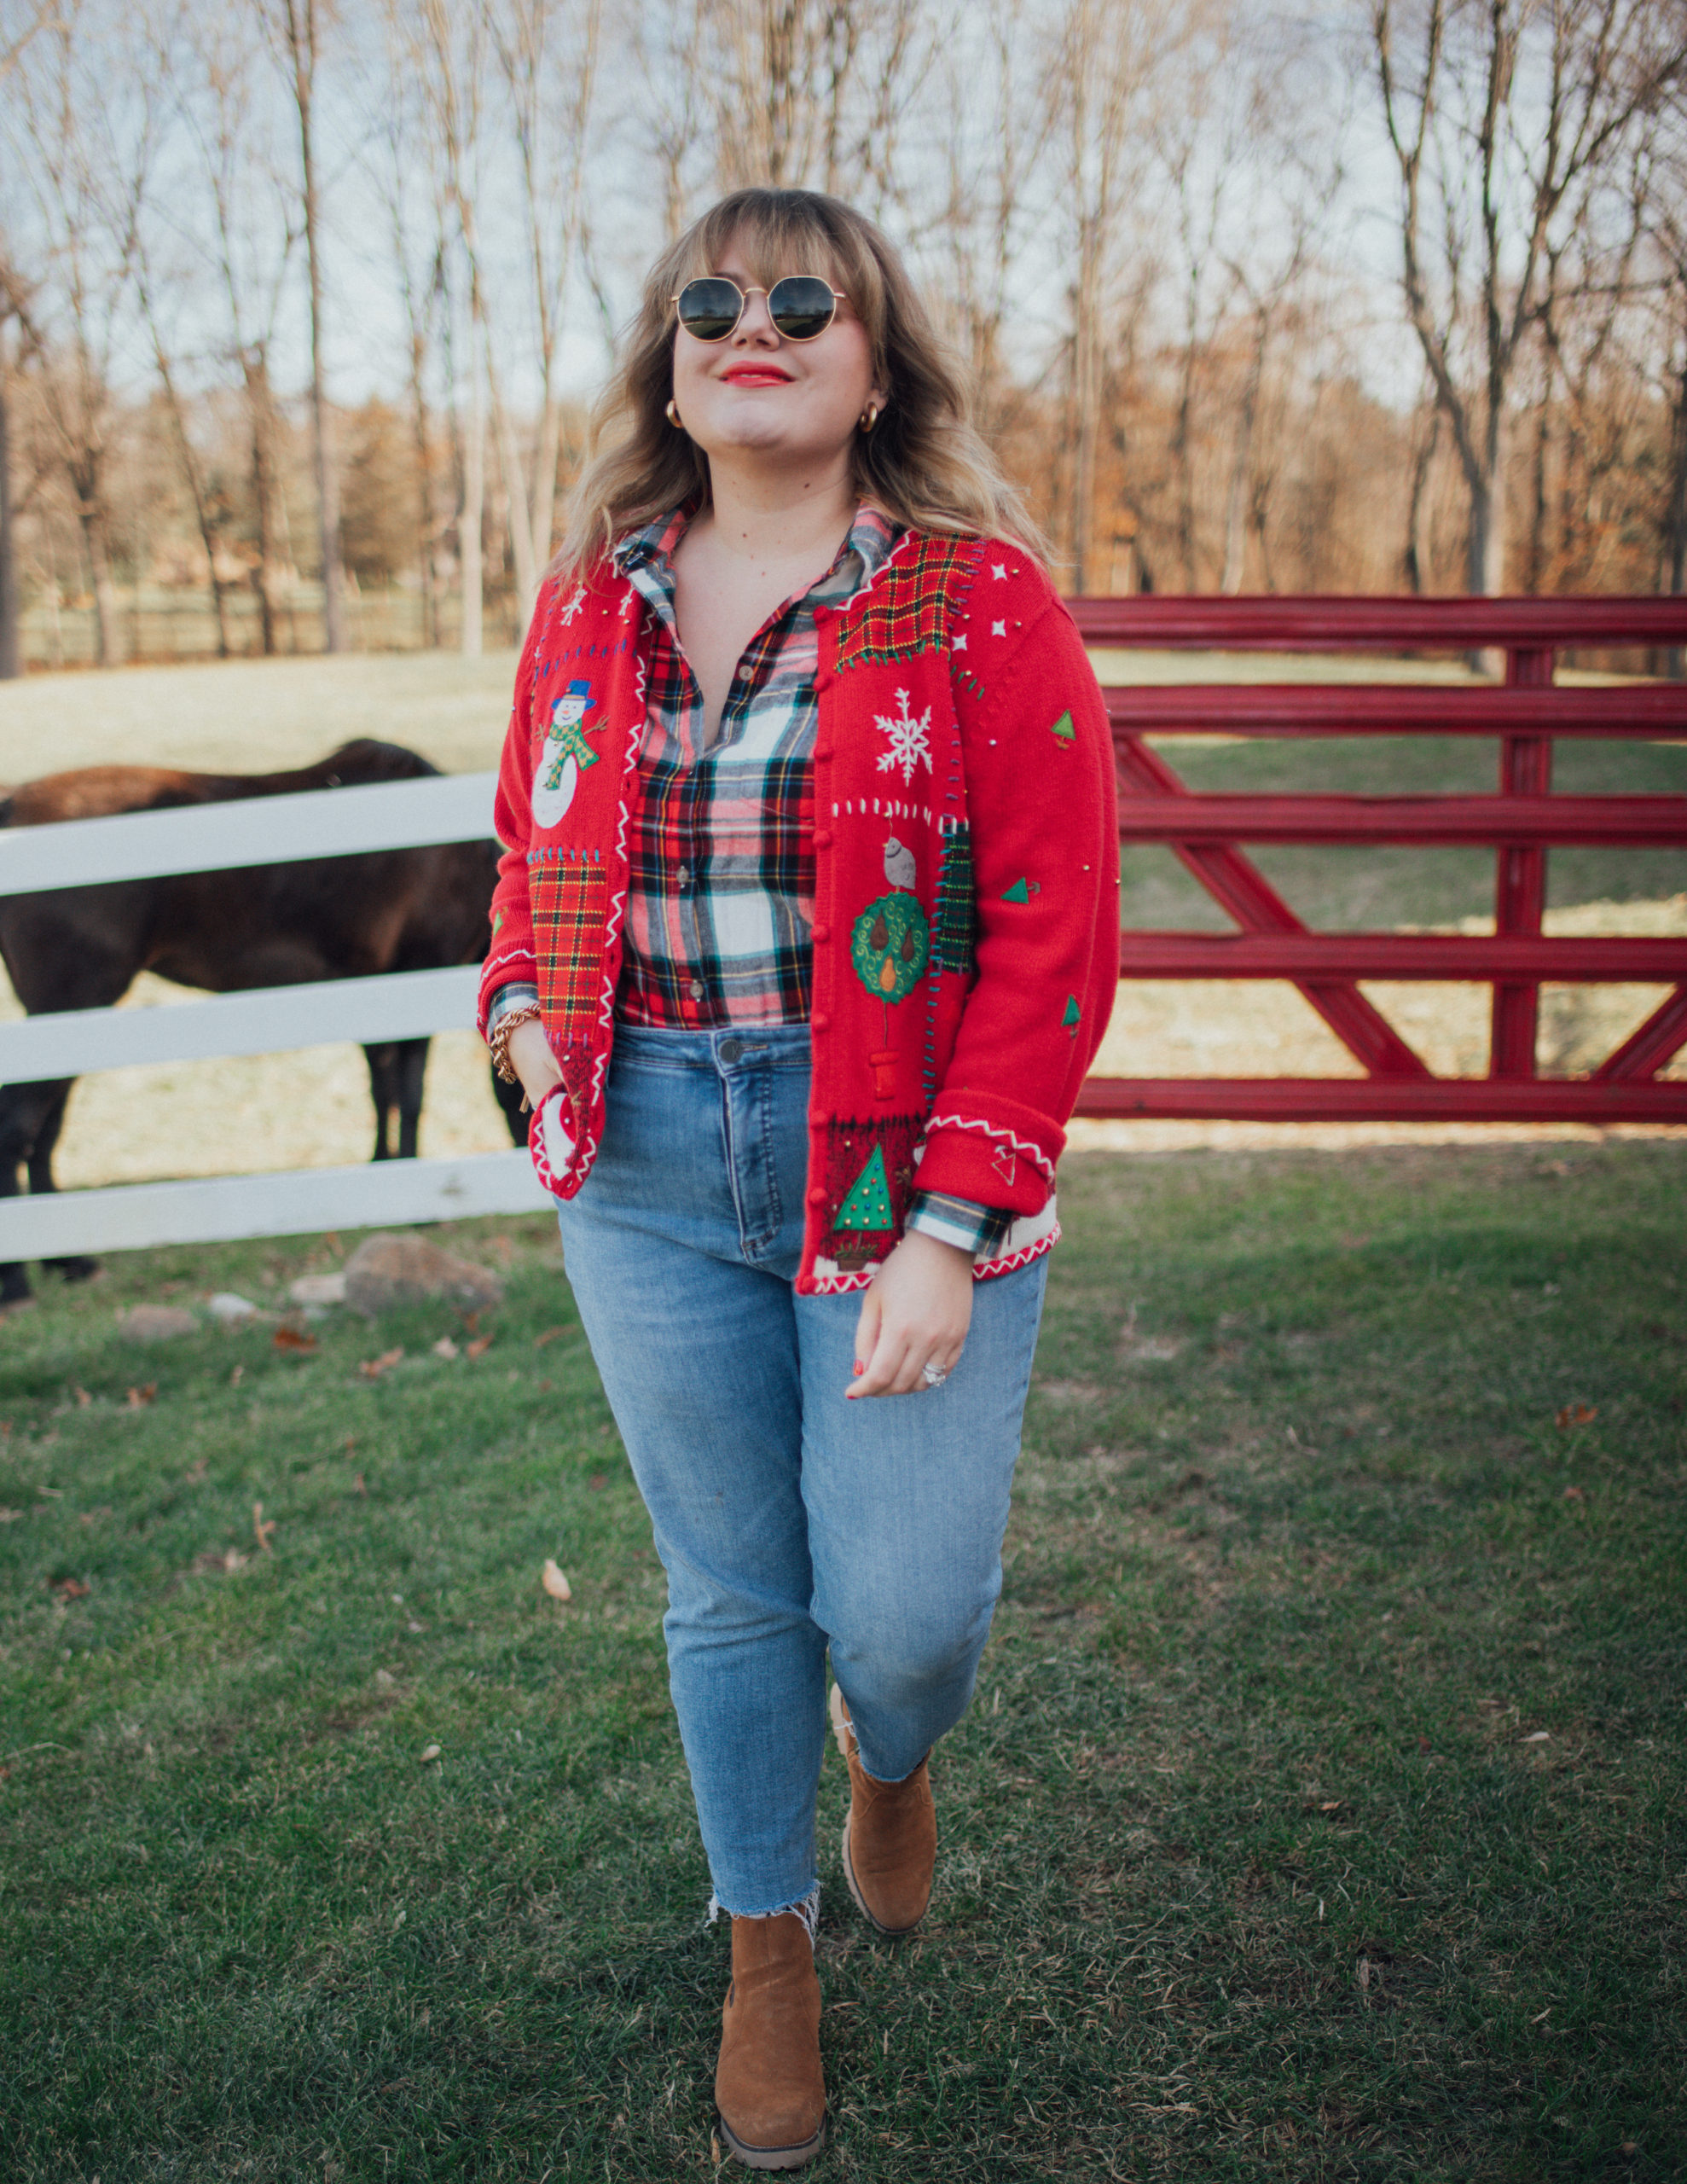 Merry Christmas 2021! Styling a vintage Christmas sweater that looks just like one I had as a kid on the blog today! 